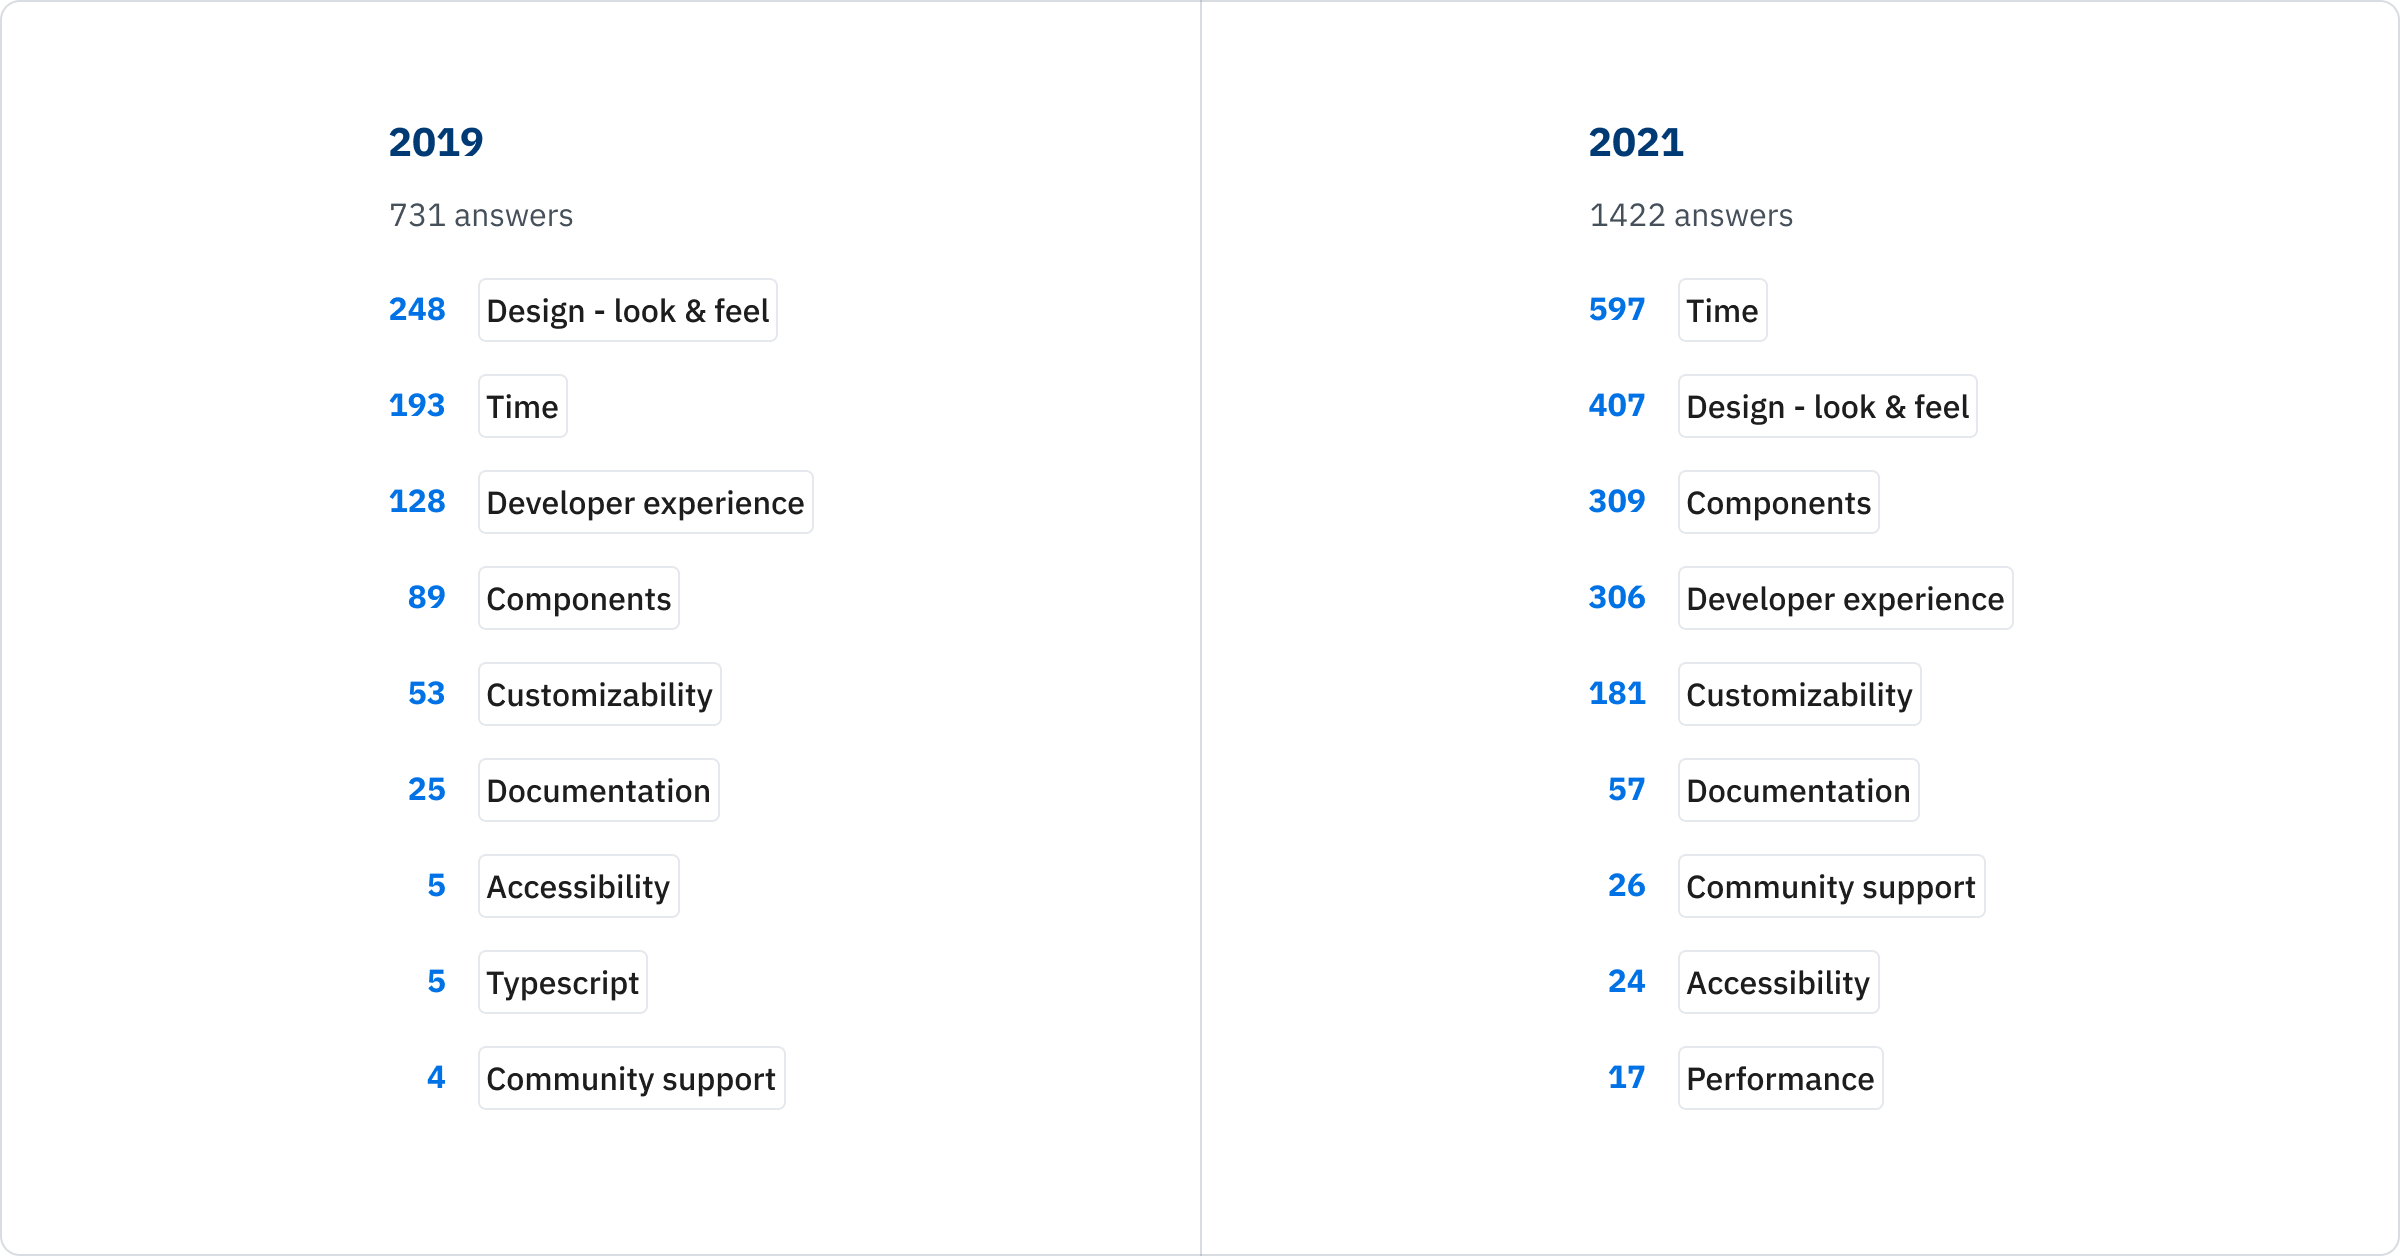 This question results in 2019 - Design: 248; Time: 193; DX: 128; Components: 89; Customizability: 53; Documentation: 25; Accessibility: 5; TypeScript: 5; Community support: 4; This question results in 2021 - Time: 597; Design: 407; Components: 309; DX: 306; Customizability: 181; Documentation: 57; Community support: 26; Accessibility: 24; Performance: 17